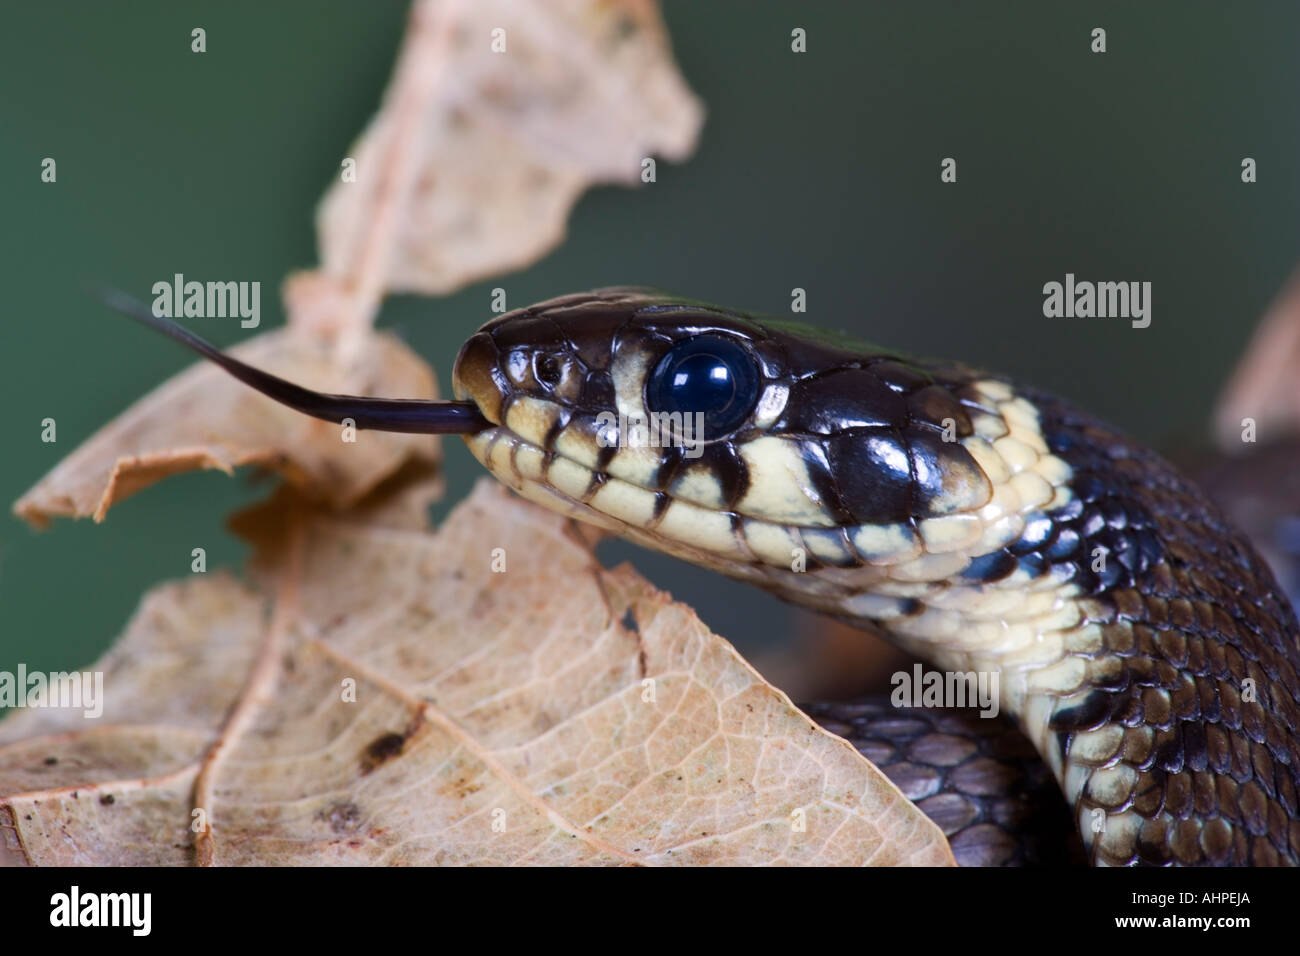 Grass snake Natrix natrix on log Potton close up of head with tongue out Bedfordshire Stock Photo